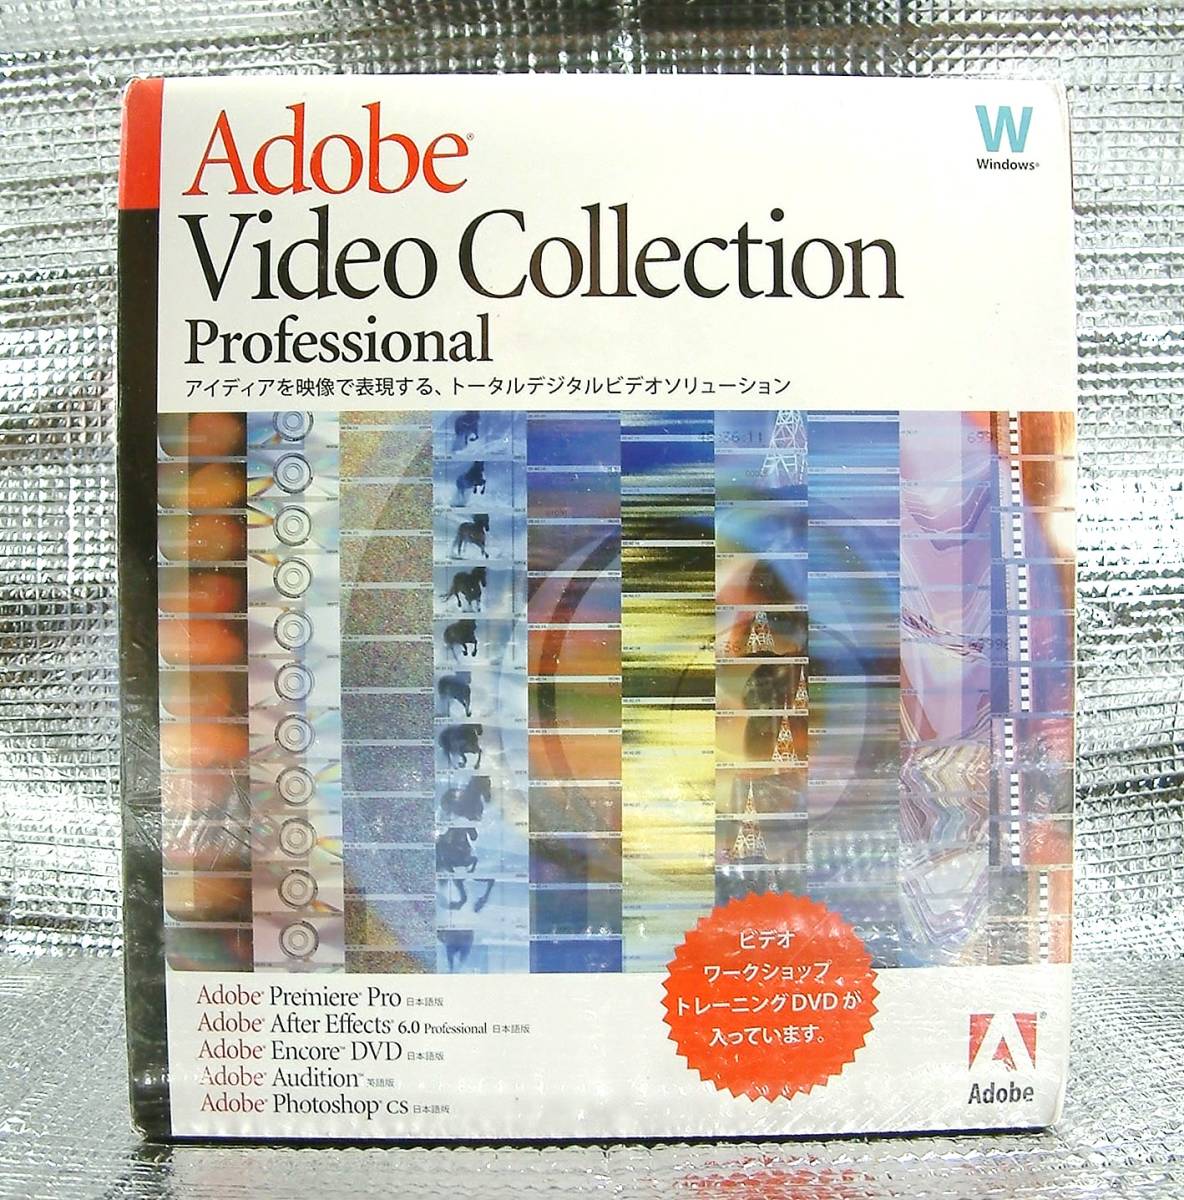 【3487】 Adobe Video Collection Pro 未開封品 アドビ ビデオ コレクション After Effects,Audition,Premiere,Photoshop CS,Encore DVD